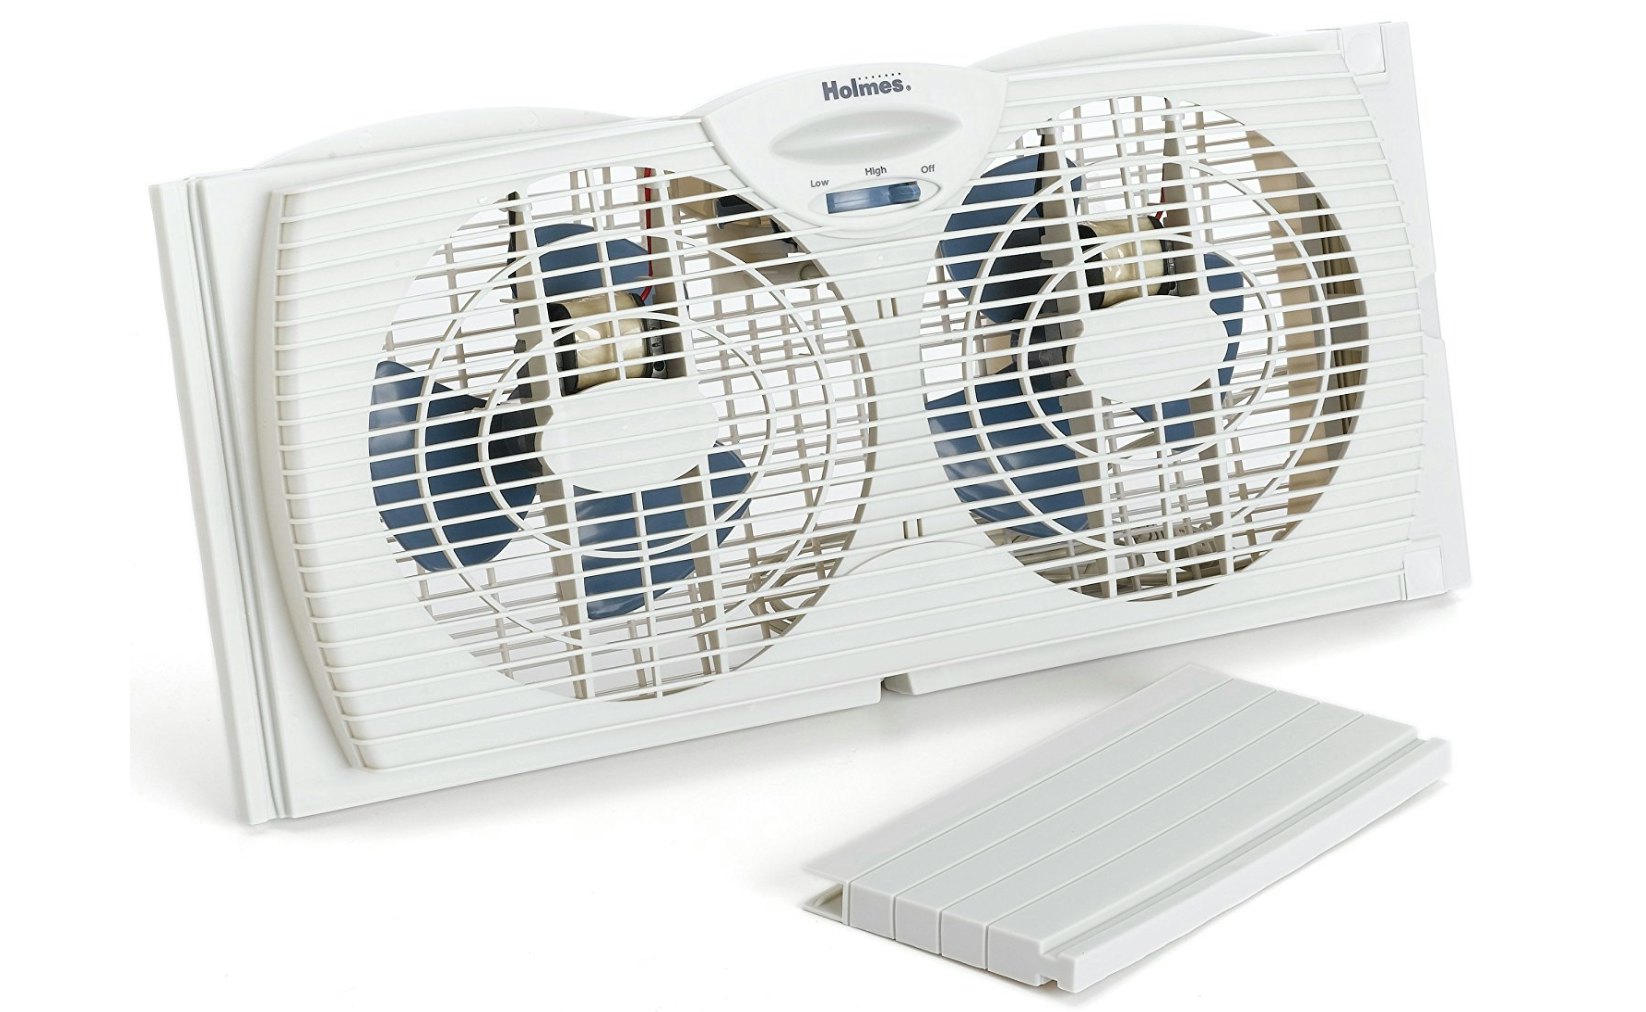 White Bionaire Bw2300 N Twin Reversible Airflow Window Fan With Remote Control 2 Blades Heating